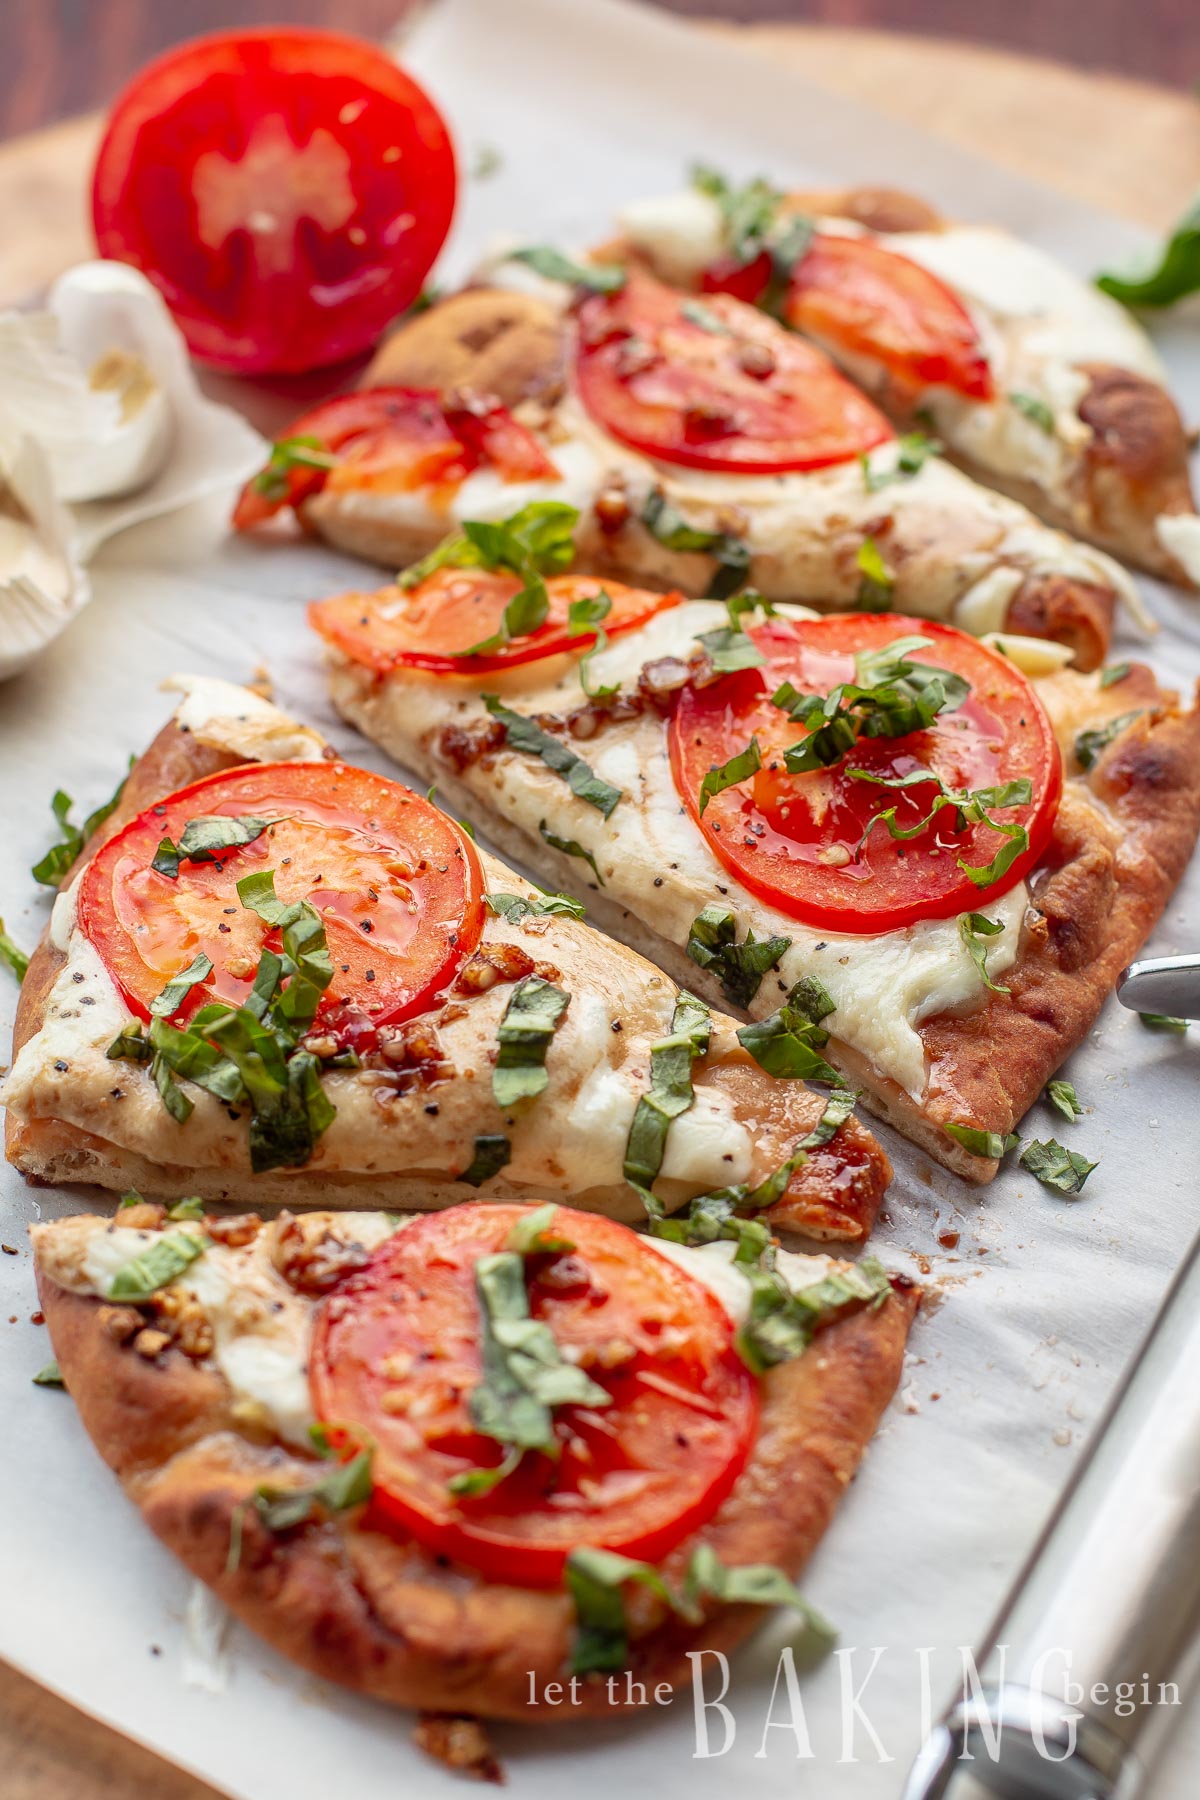 15 Minute Margherita Flatbread Pizza - delicious, easy recipe for a homemade pizza made with Naan Bread, Fresh Mozzarella, Tomatoes, Garlic and Basil that's great for busy weeknight dinners or parties.